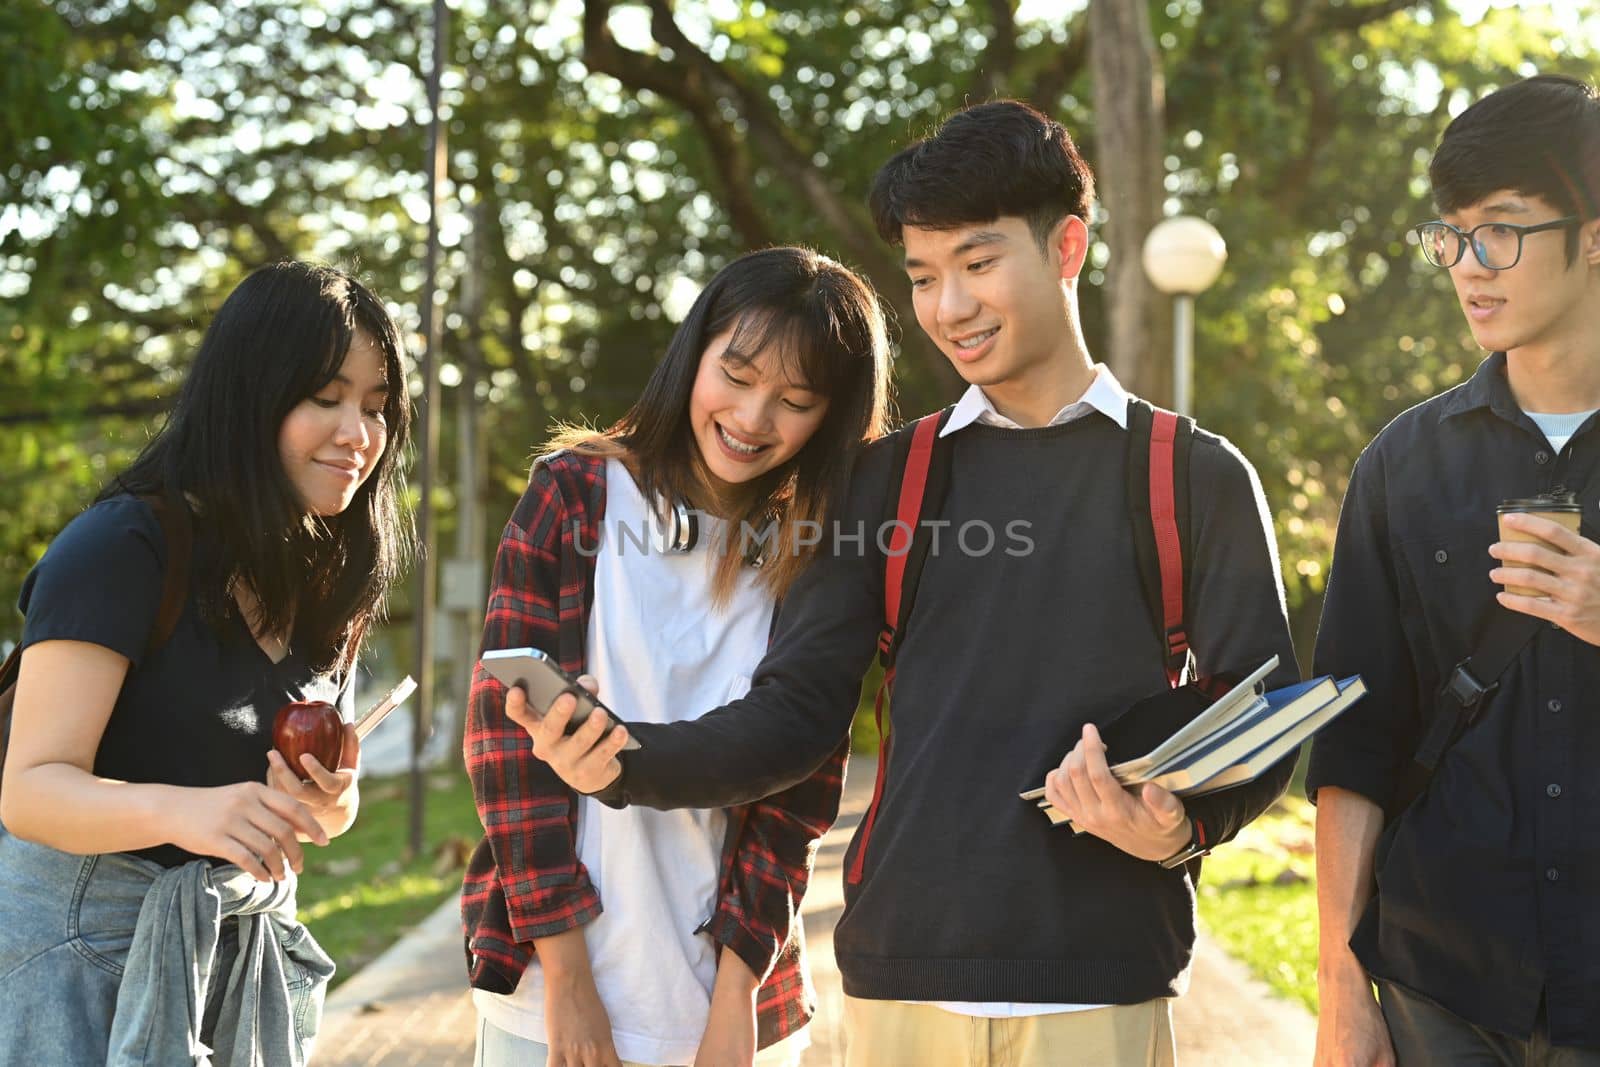 Diverse young college friends talking to etch other while walking after classes in university campus outdoors.